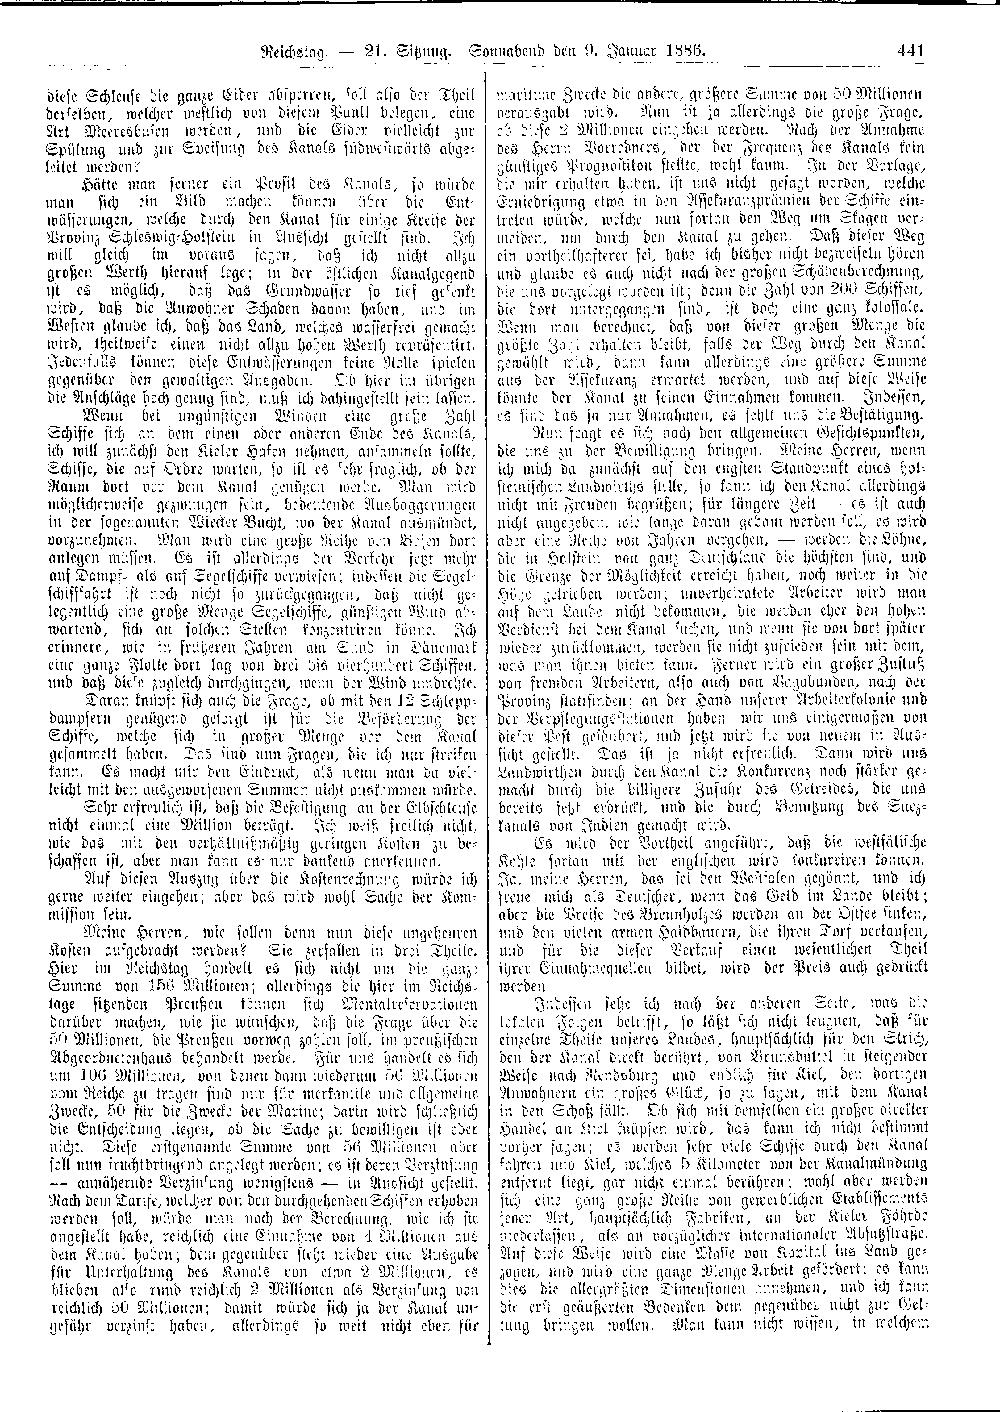 Scan of page 441